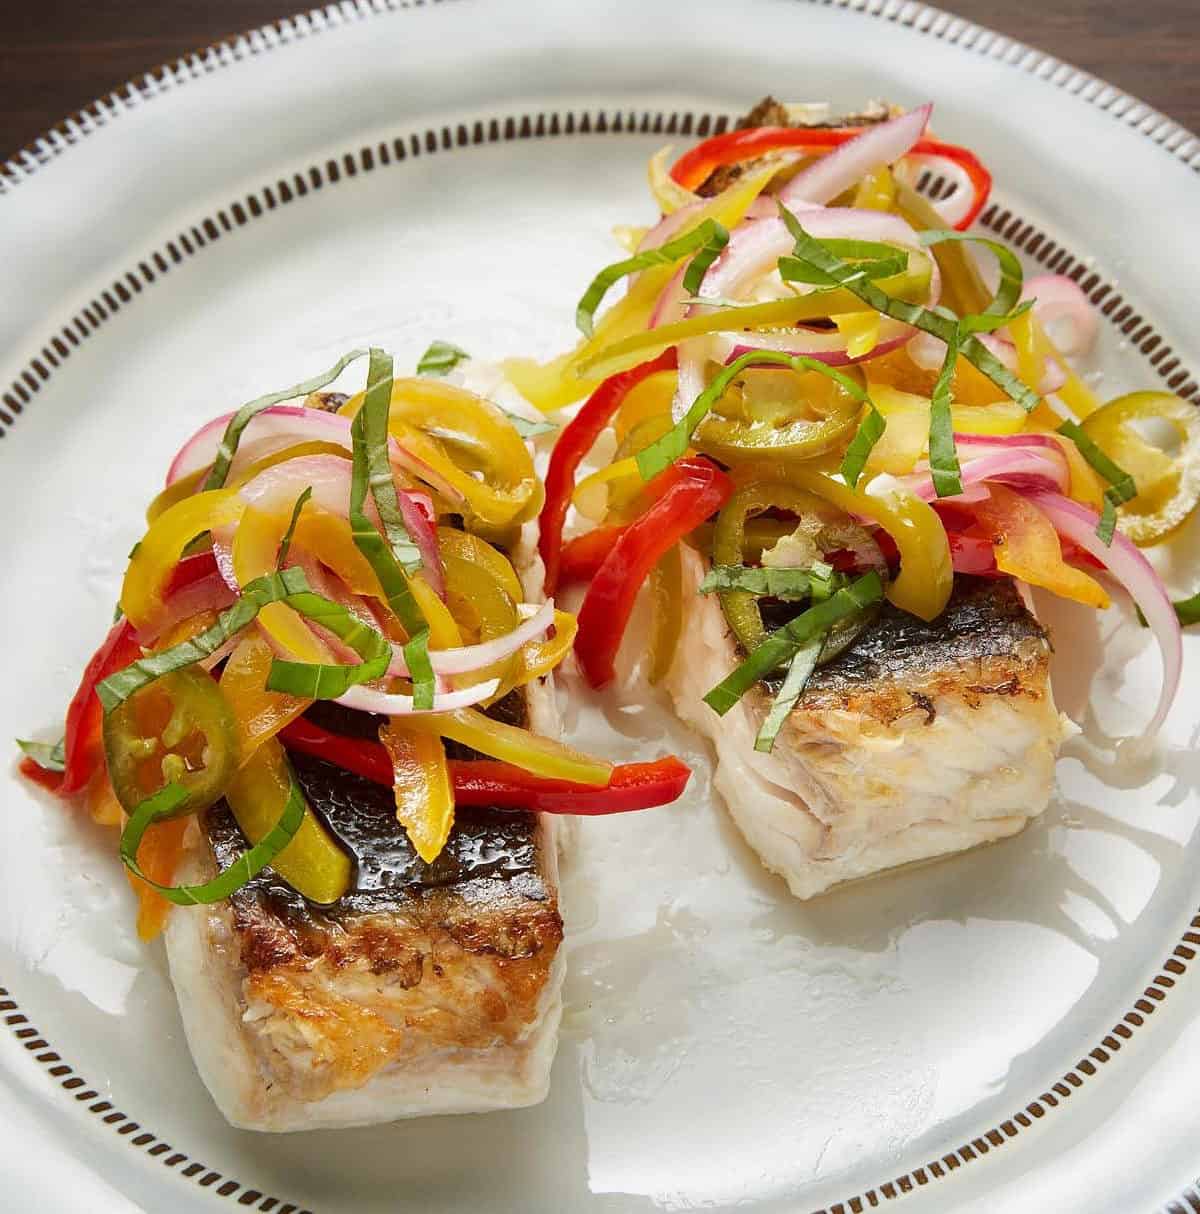  Halibut never looked so good! Try this flavorful and creamy dish tonight.